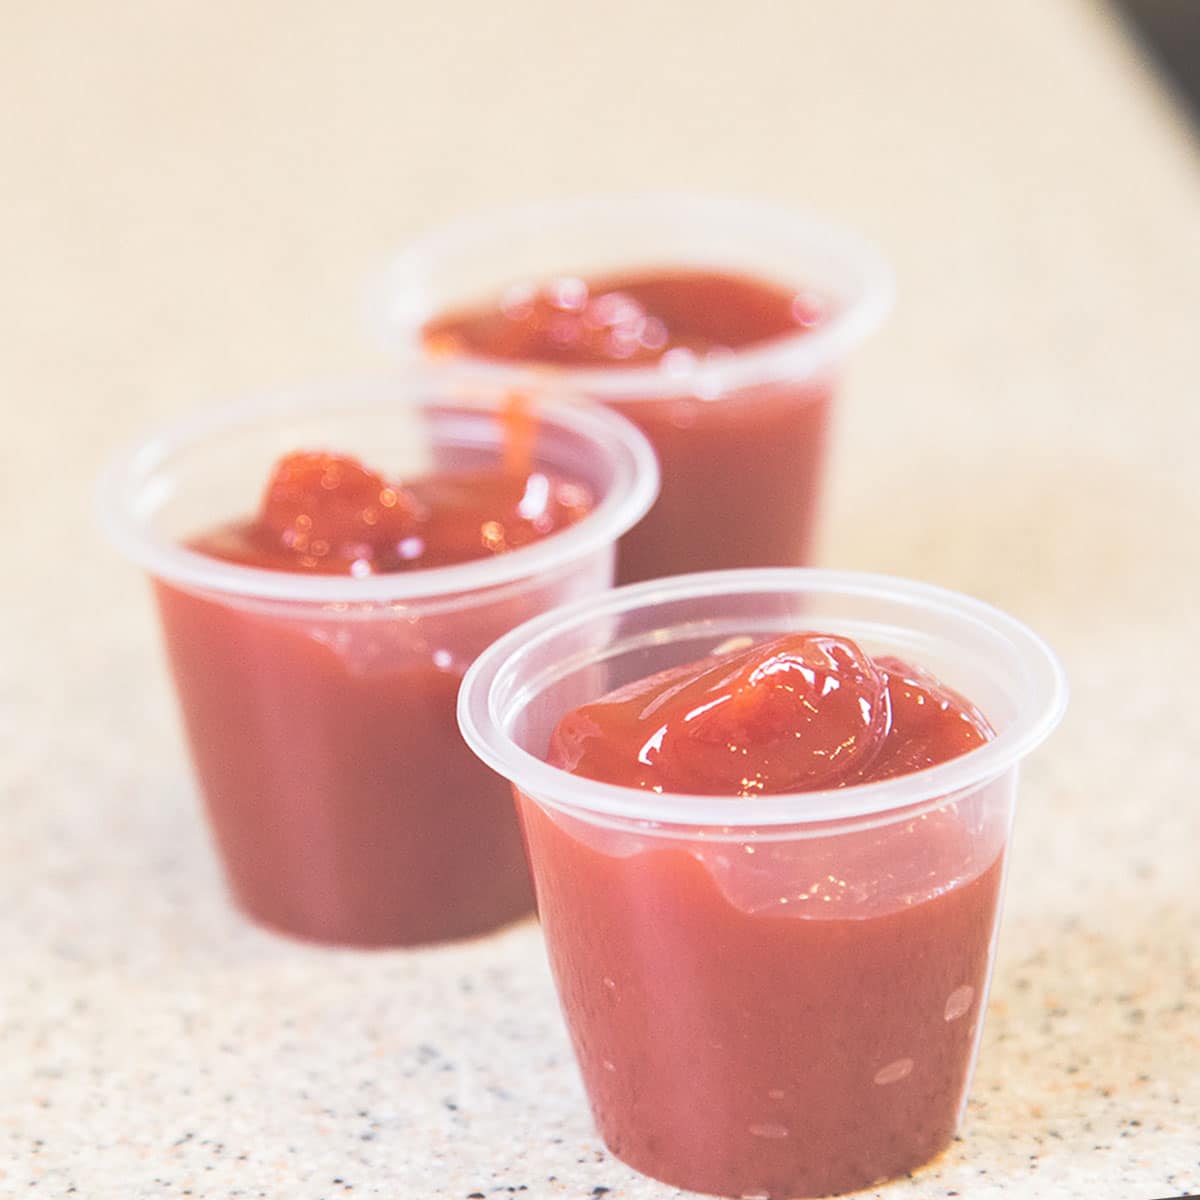 It's not a good idea to freeze plastic bottles of ketchup, especially when they're full. Don't forget that it has high water content. Freezing it will cause it to expand and could easily split the bottle.